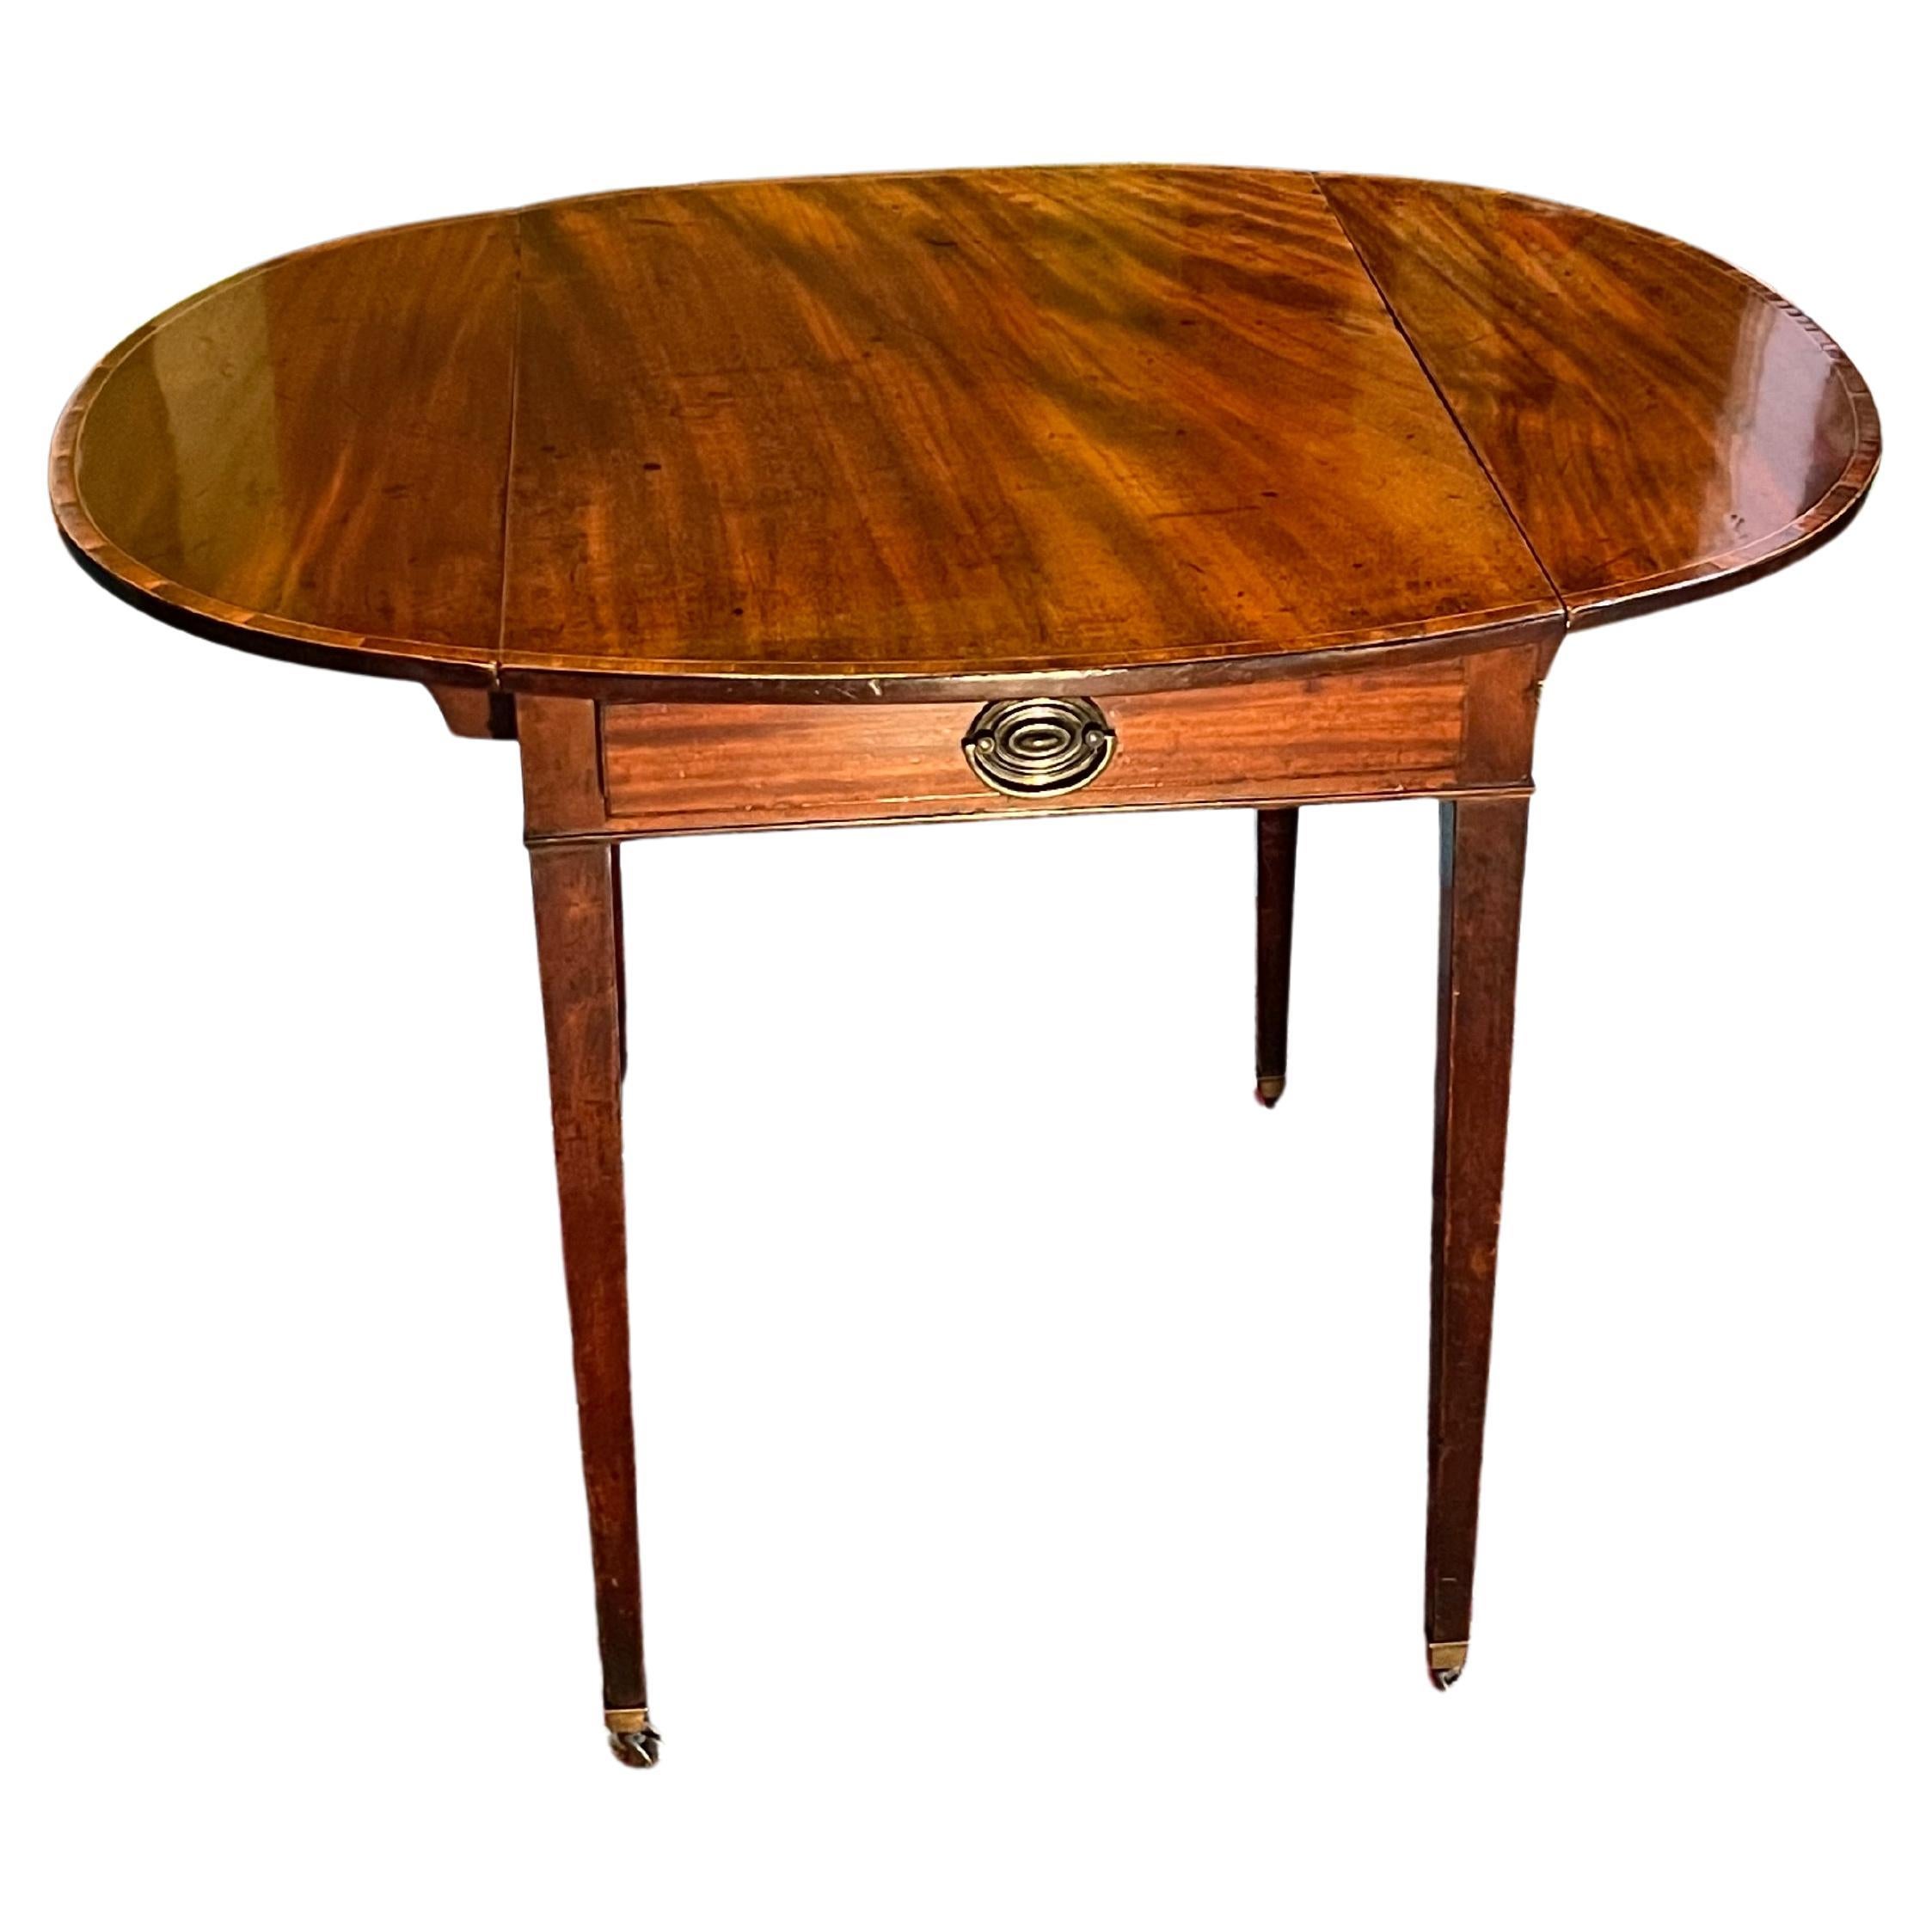 Fine English Inlaid Mahogany Hepplewhite Period Pembroke Table with Drawer For Sale